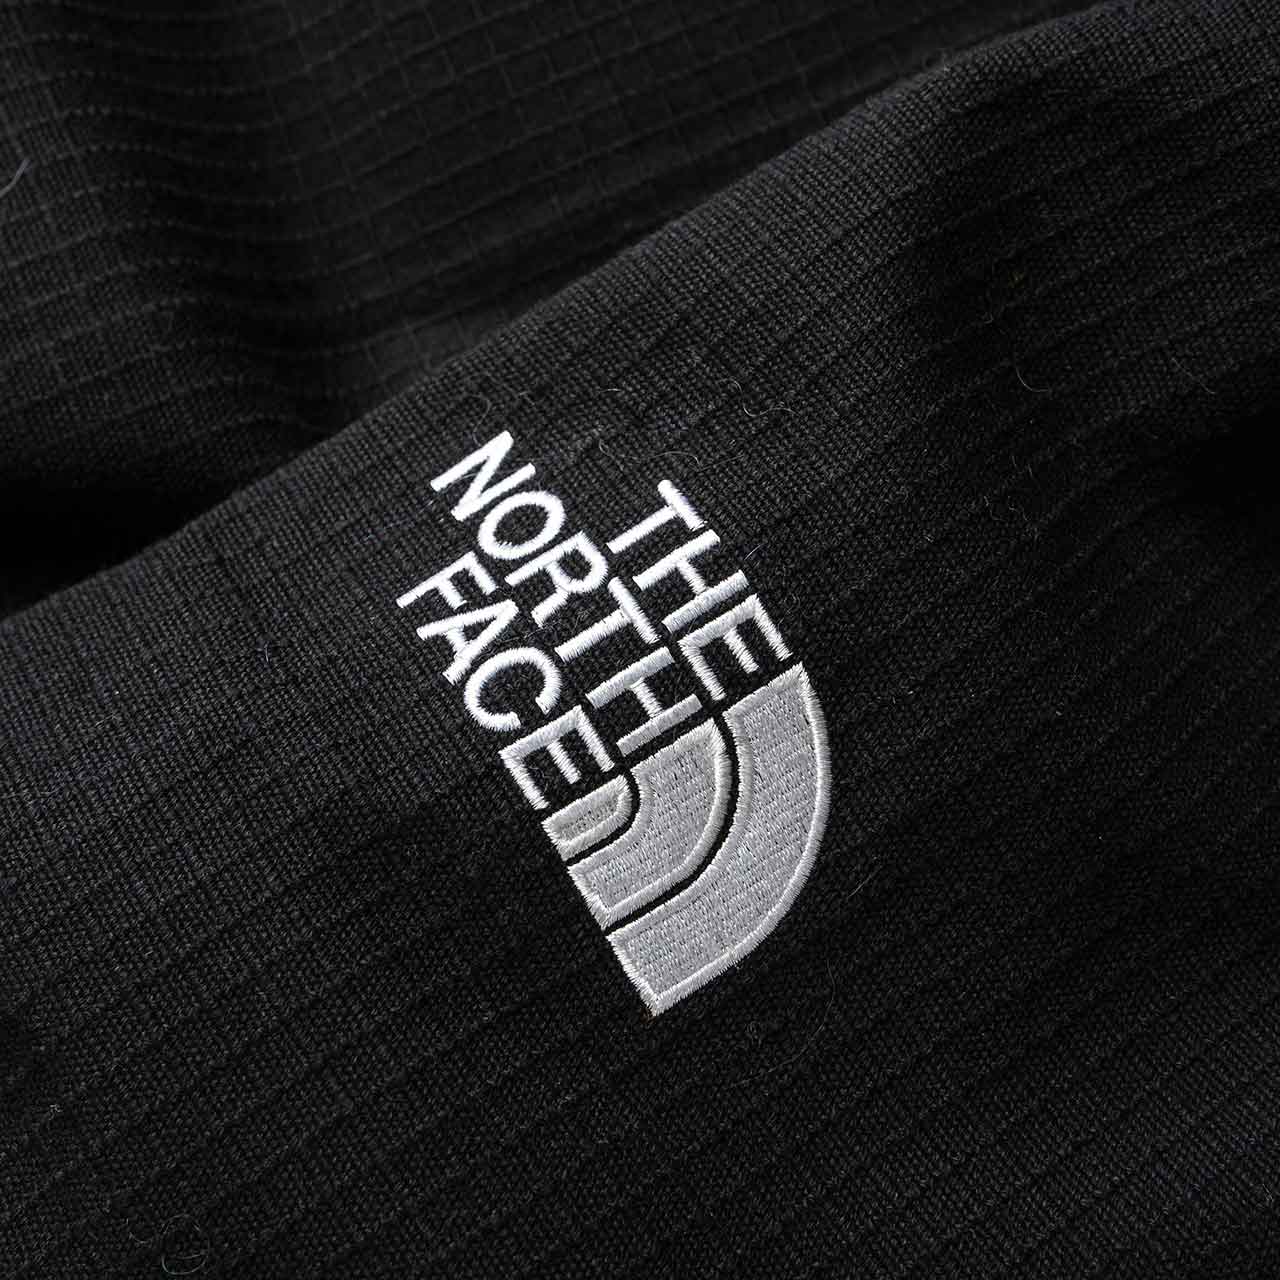 the north face black series tailor jacket (black) - nf0a4qxyjk3 - a.plus - Image - 6